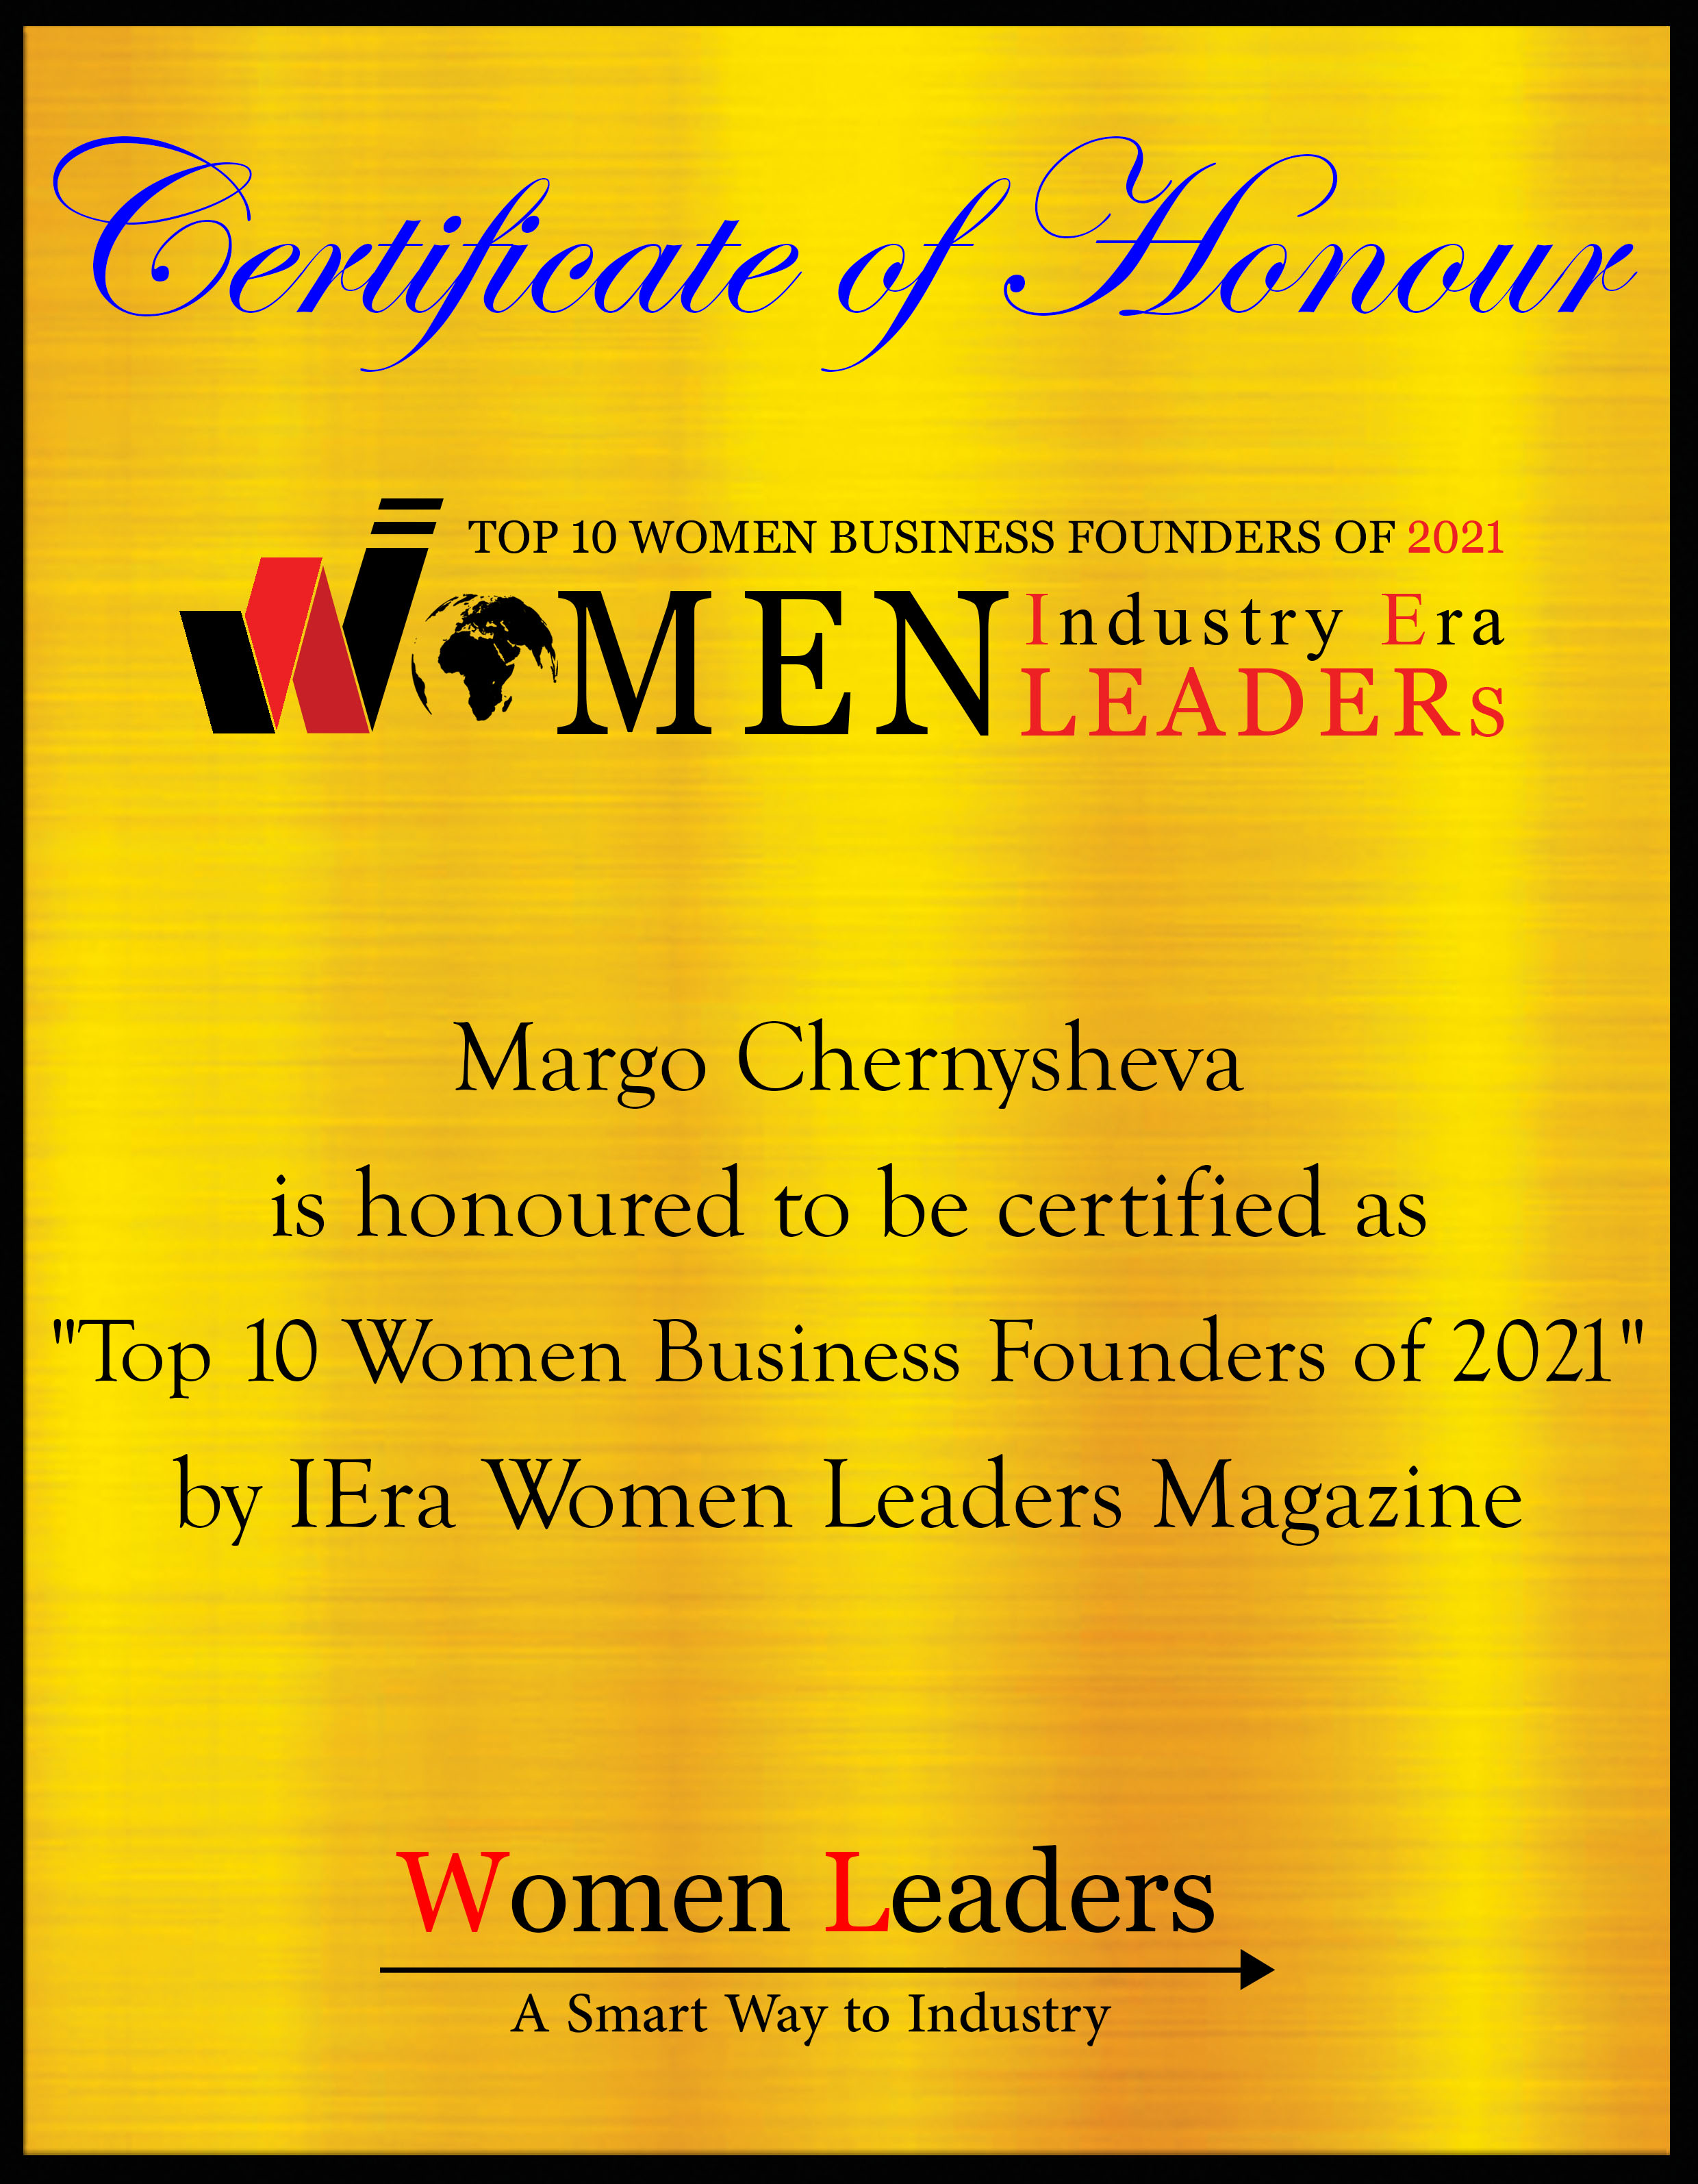 Margo Chernysheva, Founder of MC Law Group, Top Women Business Founders of 2021